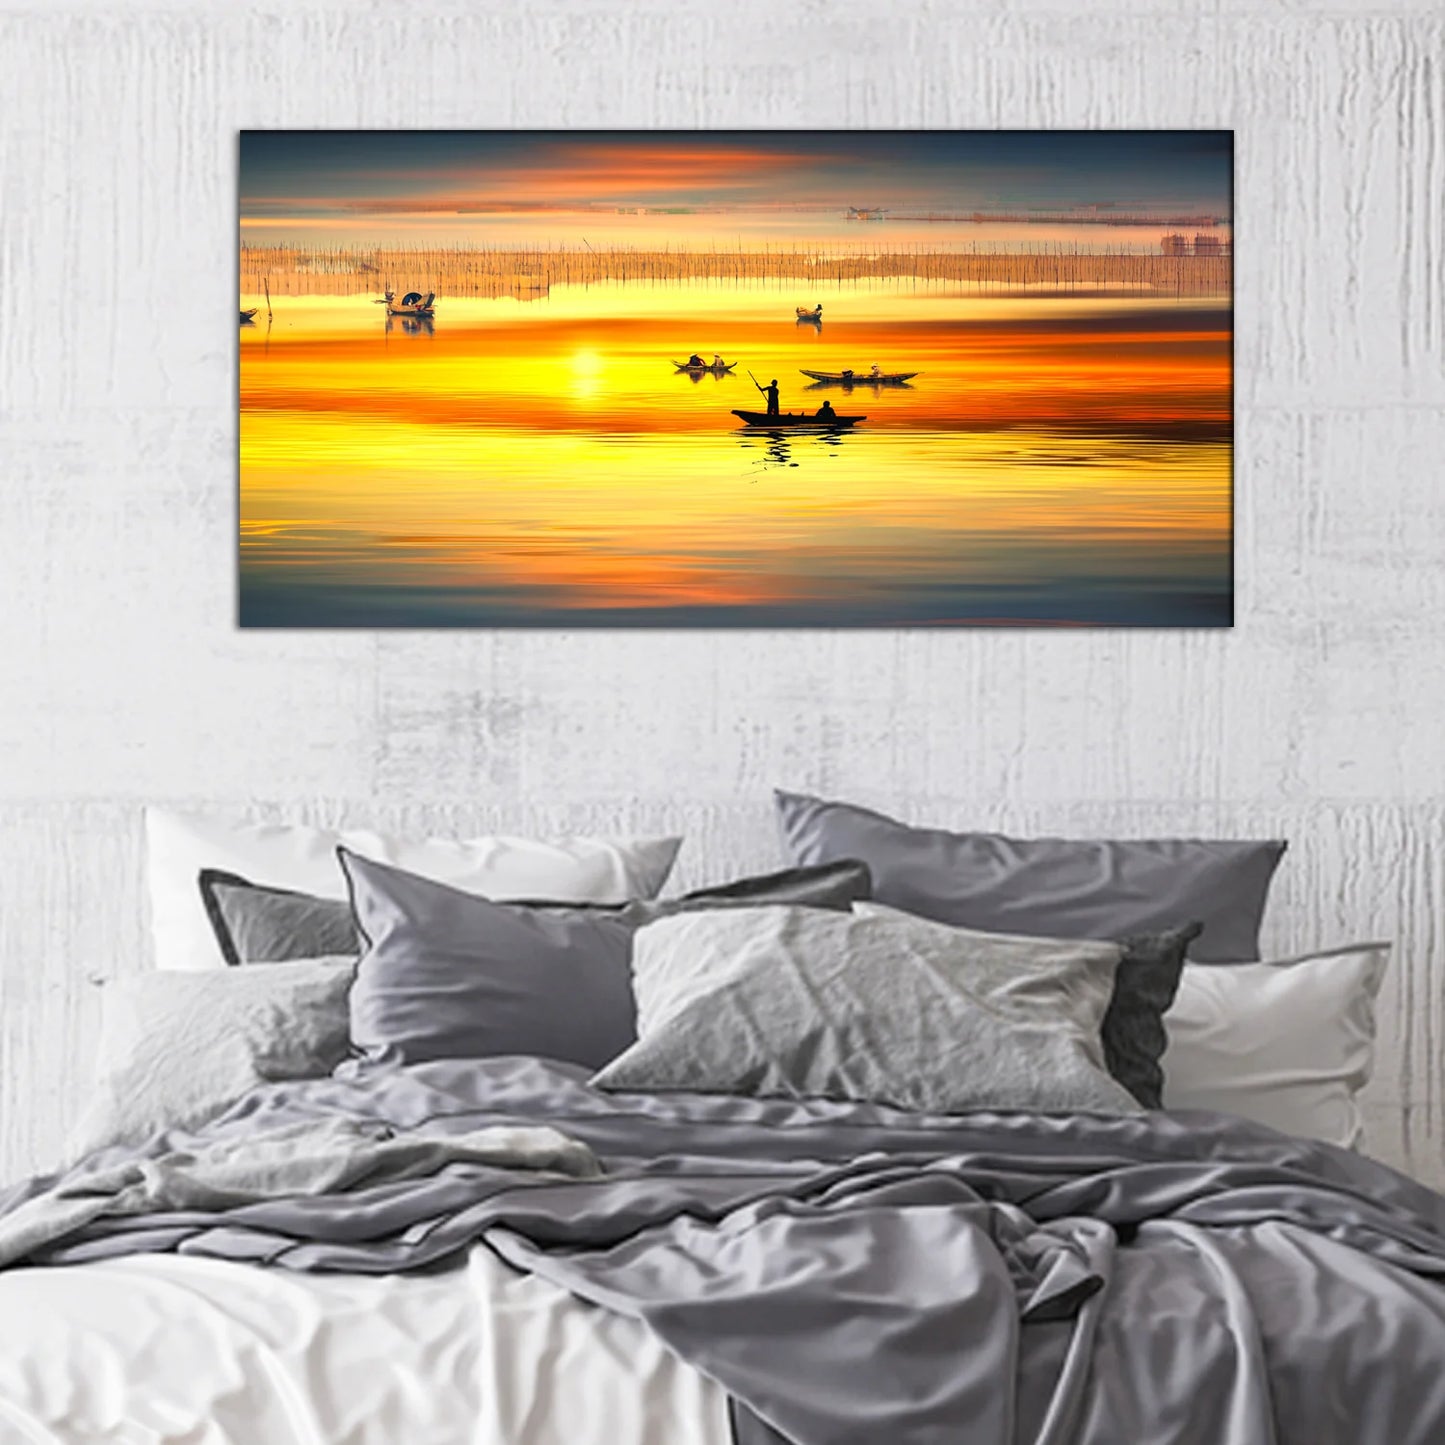 Small Boats of Fishermen at Sunset Canvas Print Wall Painting